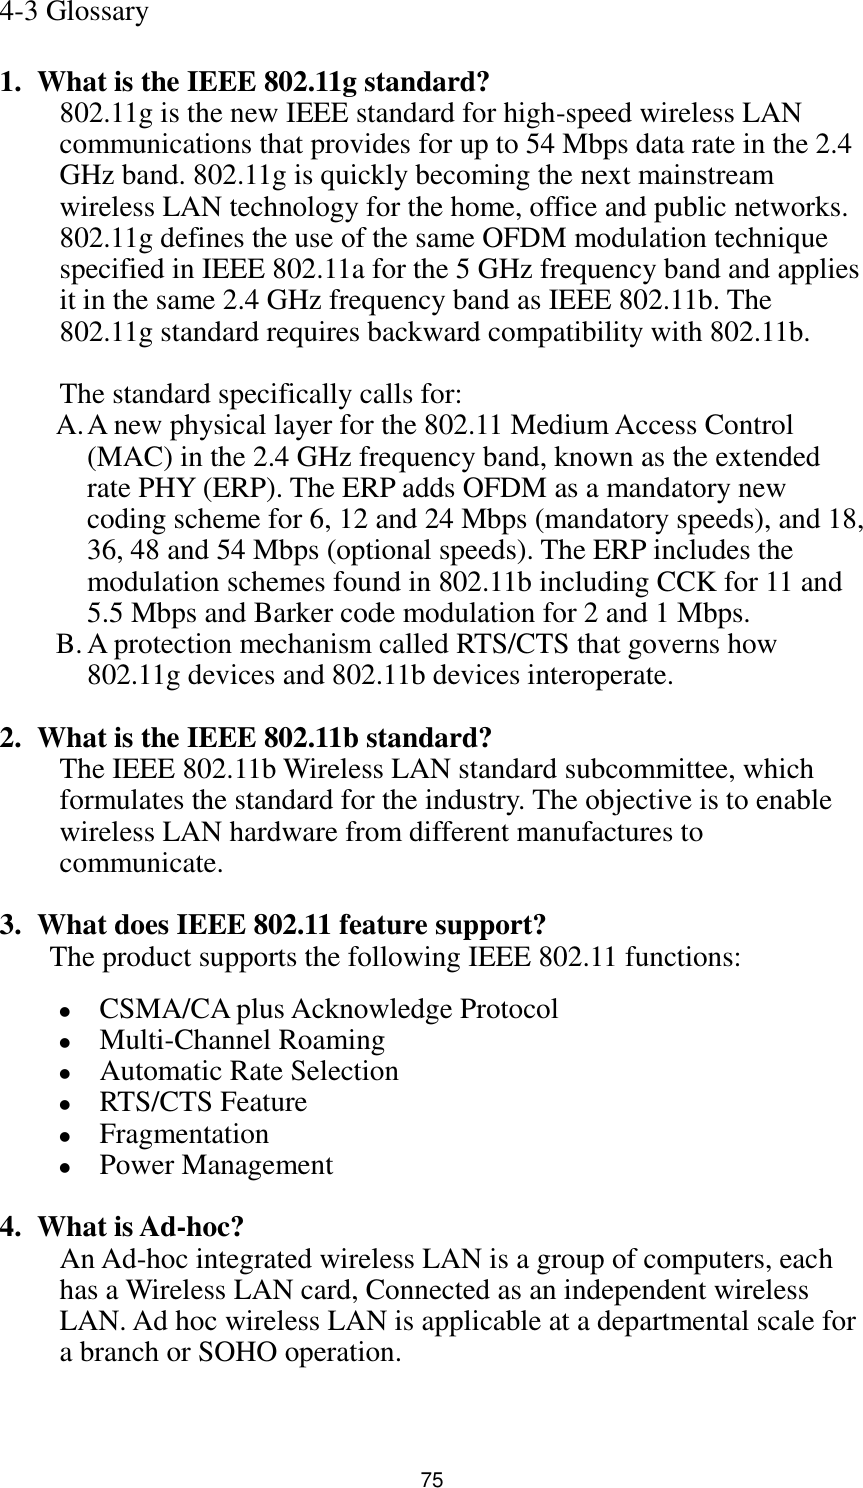  75 4-3 Glossary  1. What is the IEEE 802.11g standard? 802.11g is the new IEEE standard for high-speed wireless LAN communications that provides for up to 54 Mbps data rate in the 2.4 GHz band. 802.11g is quickly becoming the next mainstream wireless LAN technology for the home, office and public networks.   802.11g defines the use of the same OFDM modulation technique specified in IEEE 802.11a for the 5 GHz frequency band and applies it in the same 2.4 GHz frequency band as IEEE 802.11b. The 802.11g standard requires backward compatibility with 802.11b.  The standard specifically calls for:   A. A new physical layer for the 802.11 Medium Access Control (MAC) in the 2.4 GHz frequency band, known as the extended rate PHY (ERP). The ERP adds OFDM as a mandatory new coding scheme for 6, 12 and 24 Mbps (mandatory speeds), and 18, 36, 48 and 54 Mbps (optional speeds). The ERP includes the modulation schemes found in 802.11b including CCK for 11 and 5.5 Mbps and Barker code modulation for 2 and 1 Mbps. B. A protection mechanism called RTS/CTS that governs how 802.11g devices and 802.11b devices interoperate.  2. What is the IEEE 802.11b standard? The IEEE 802.11b Wireless LAN standard subcommittee, which formulates the standard for the industry. The objective is to enable wireless LAN hardware from different manufactures to communicate.  3. What does IEEE 802.11 feature support? The product supports the following IEEE 802.11 functions:  CSMA/CA plus Acknowledge Protocol  Multi-Channel Roaming  Automatic Rate Selection  RTS/CTS Feature  Fragmentation  Power Management  4. What is Ad-hoc? An Ad-hoc integrated wireless LAN is a group of computers, each has a Wireless LAN card, Connected as an independent wireless LAN. Ad hoc wireless LAN is applicable at a departmental scale for a branch or SOHO operation.   